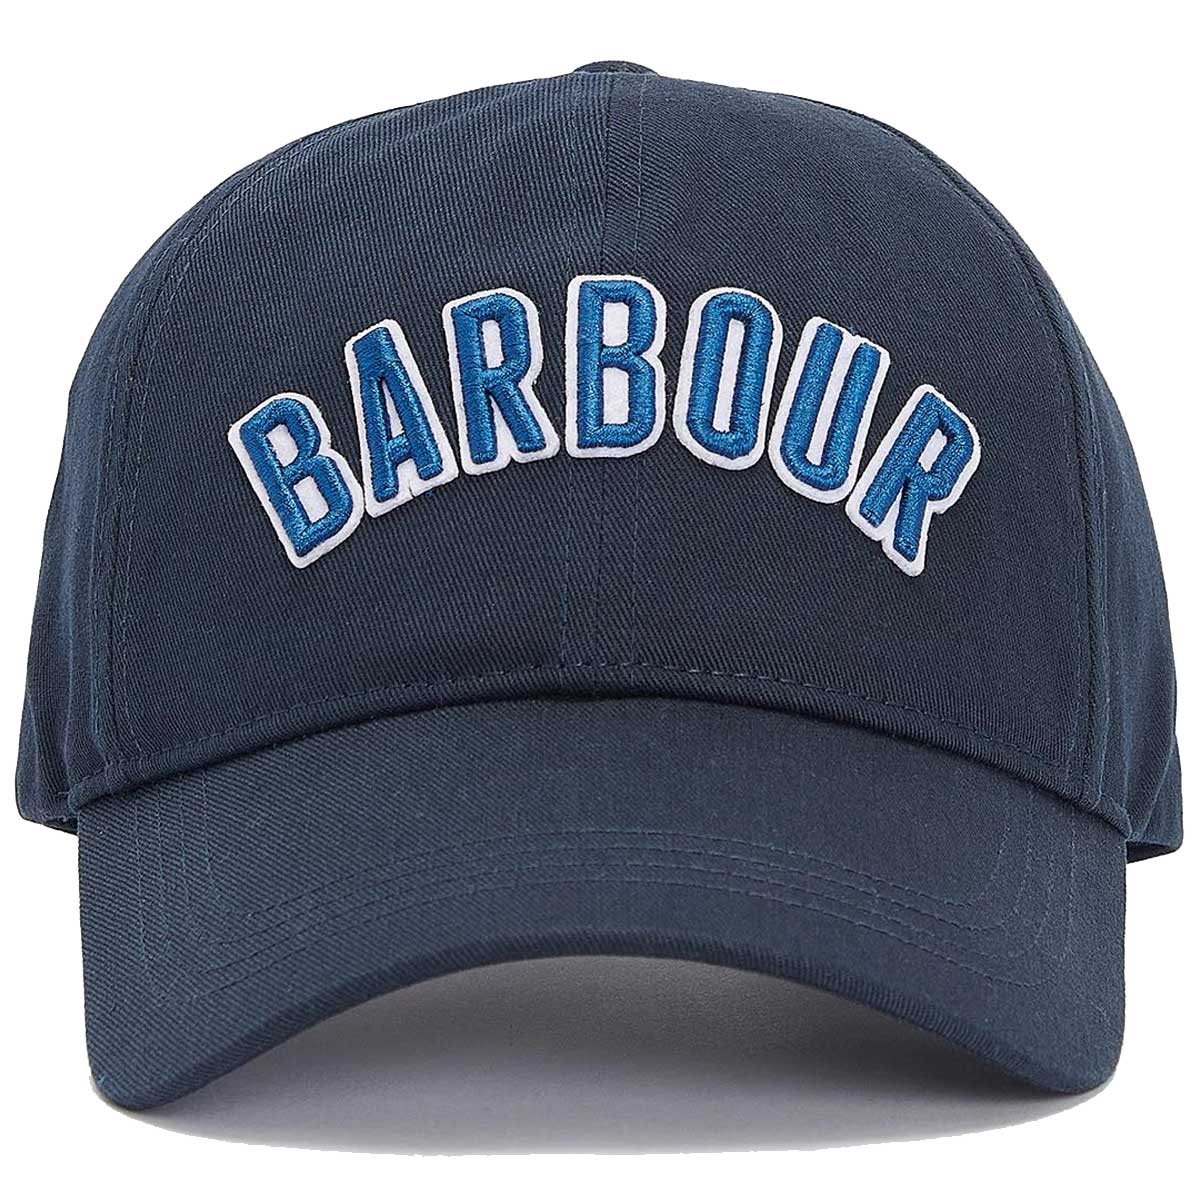 BARBOUR Campbell Sports Cap - Classic Navy